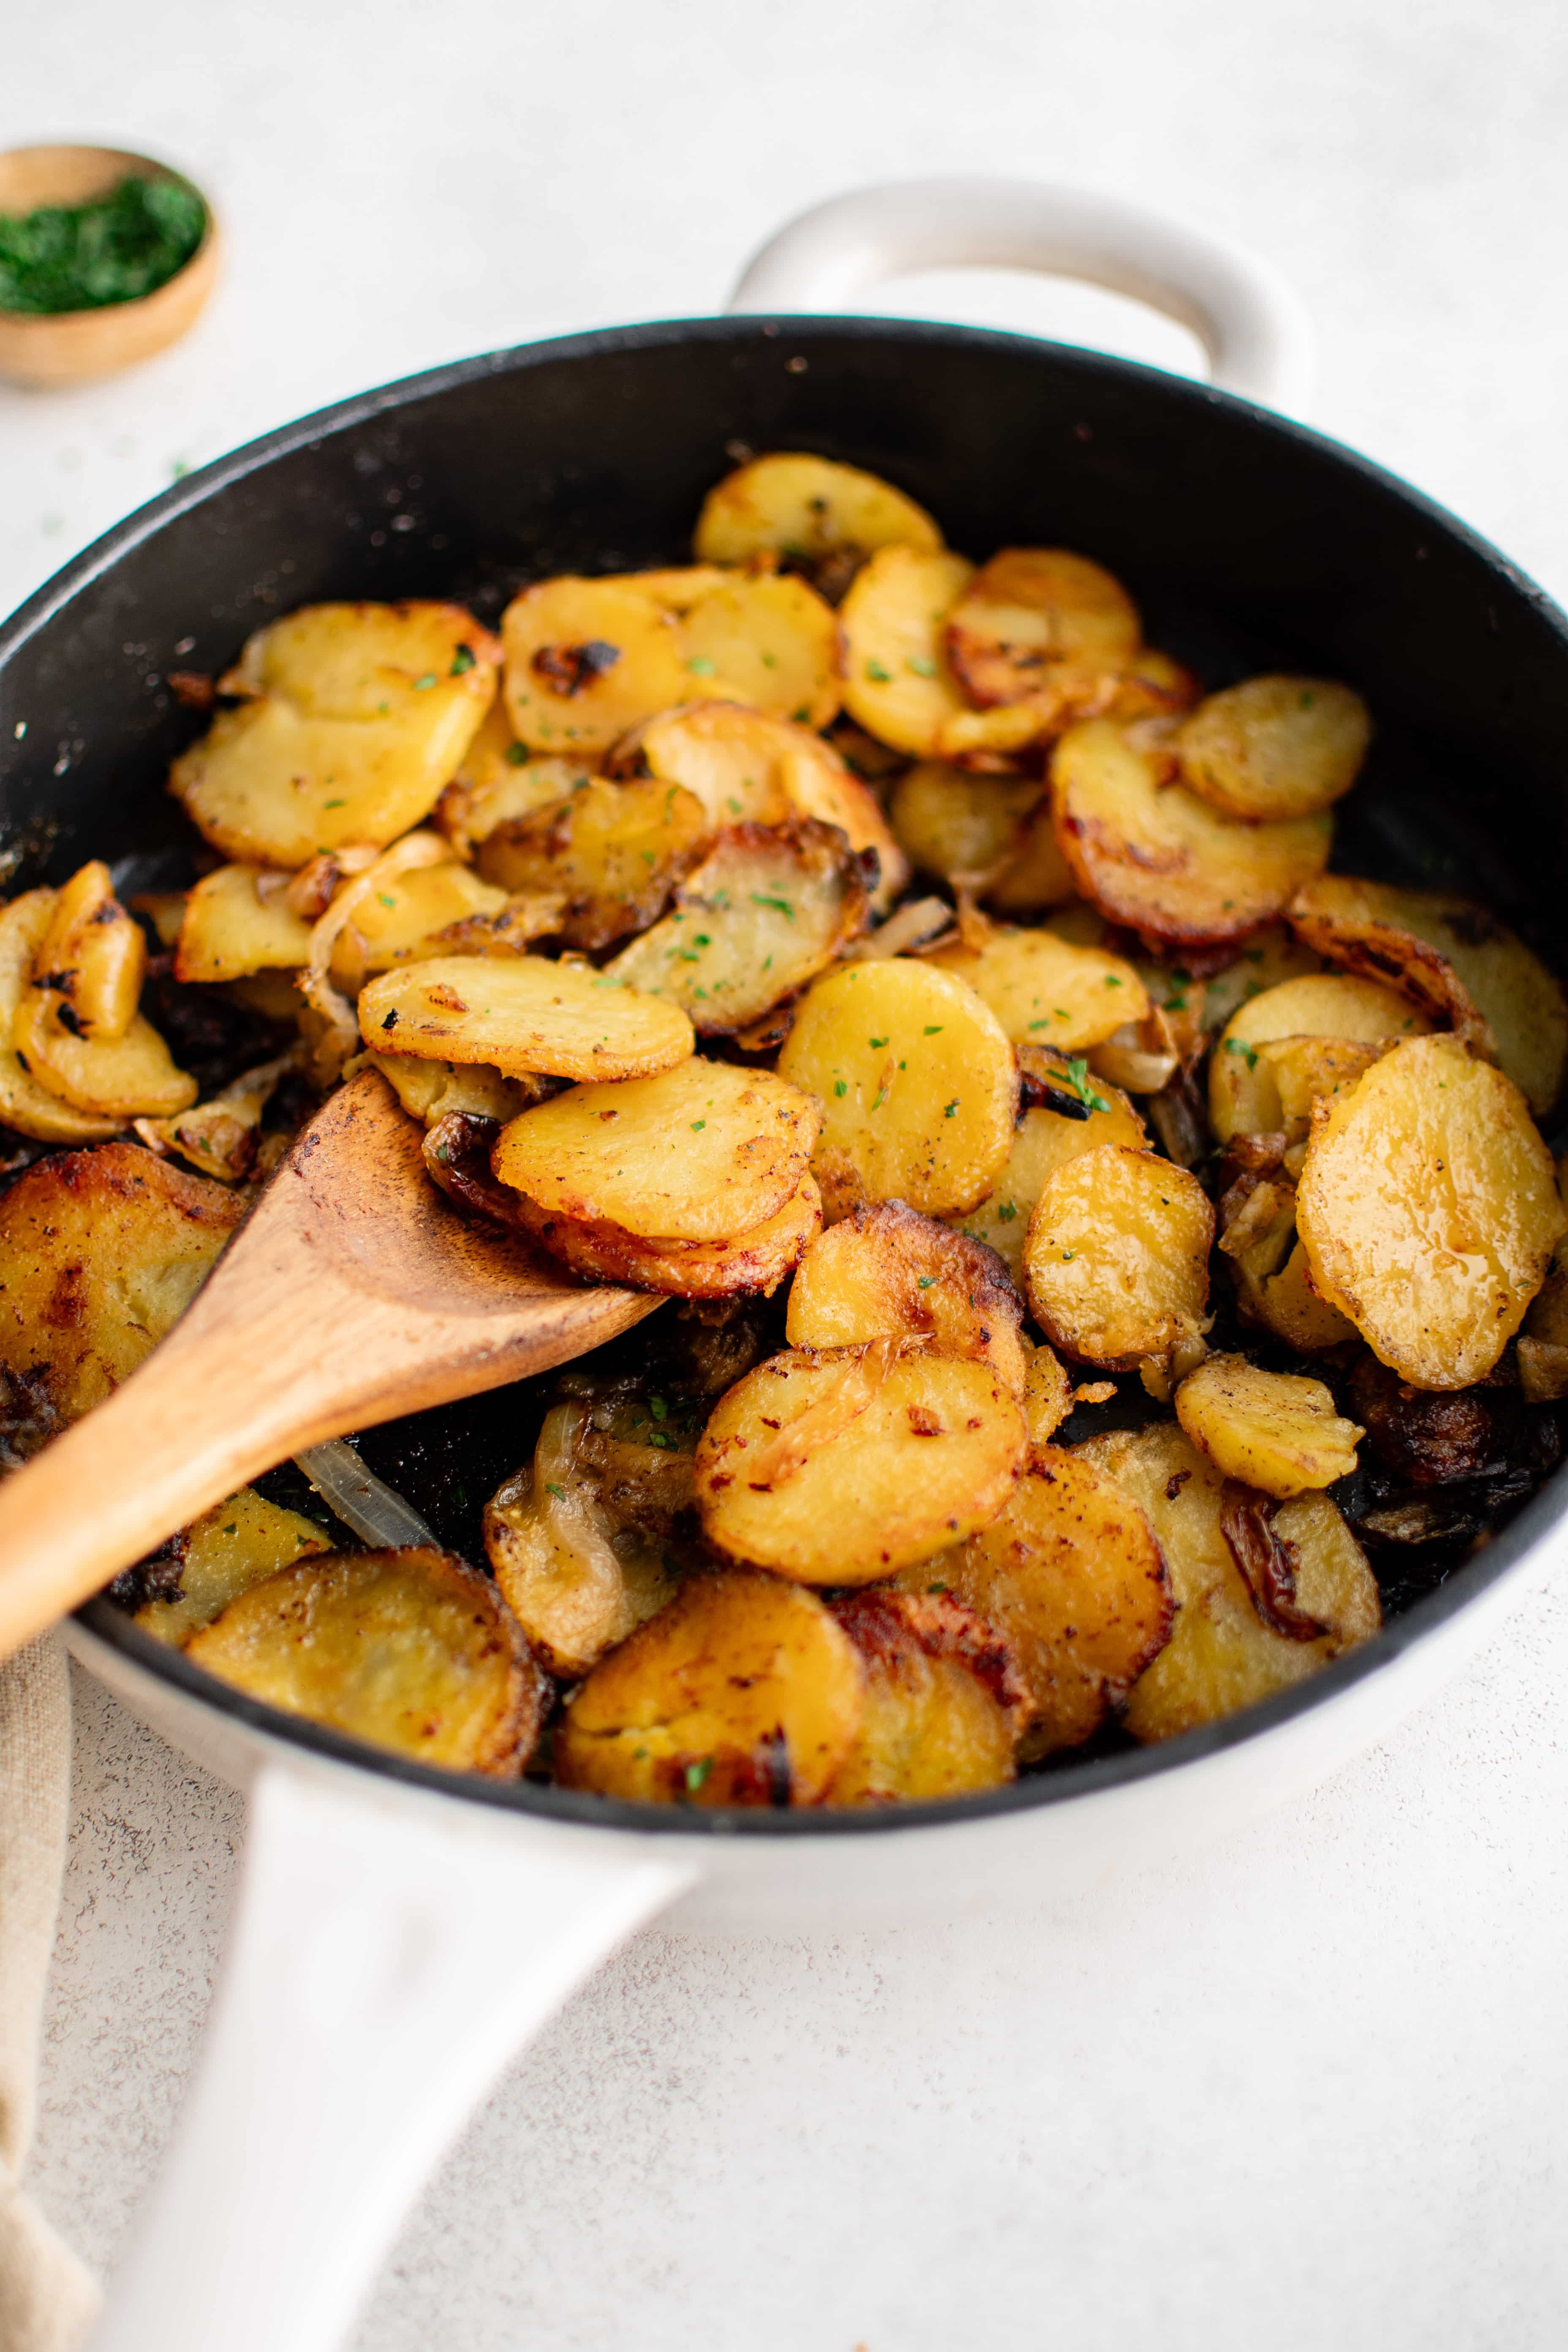 Large cast iron pan filled with crispy cooked slices of Idaho potatoes and onion seasoned with garlic powder, salt, and black pepper and garnished with fresh parsley.